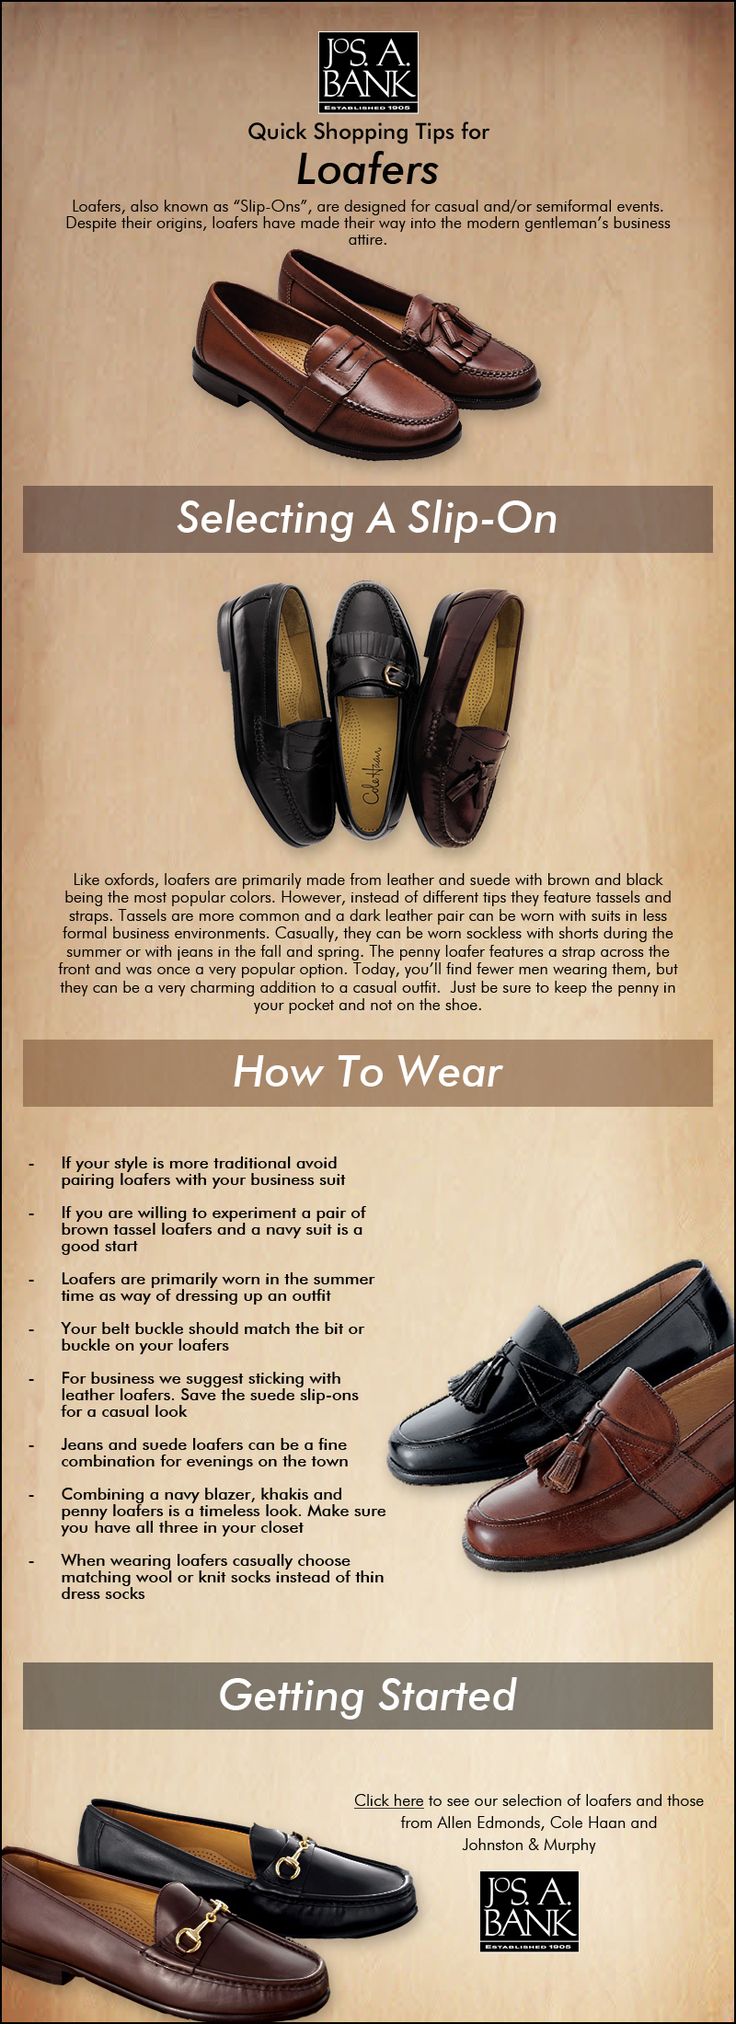 Loafers come in plenty of styles. Check out our tips for shopping for slip-ons....